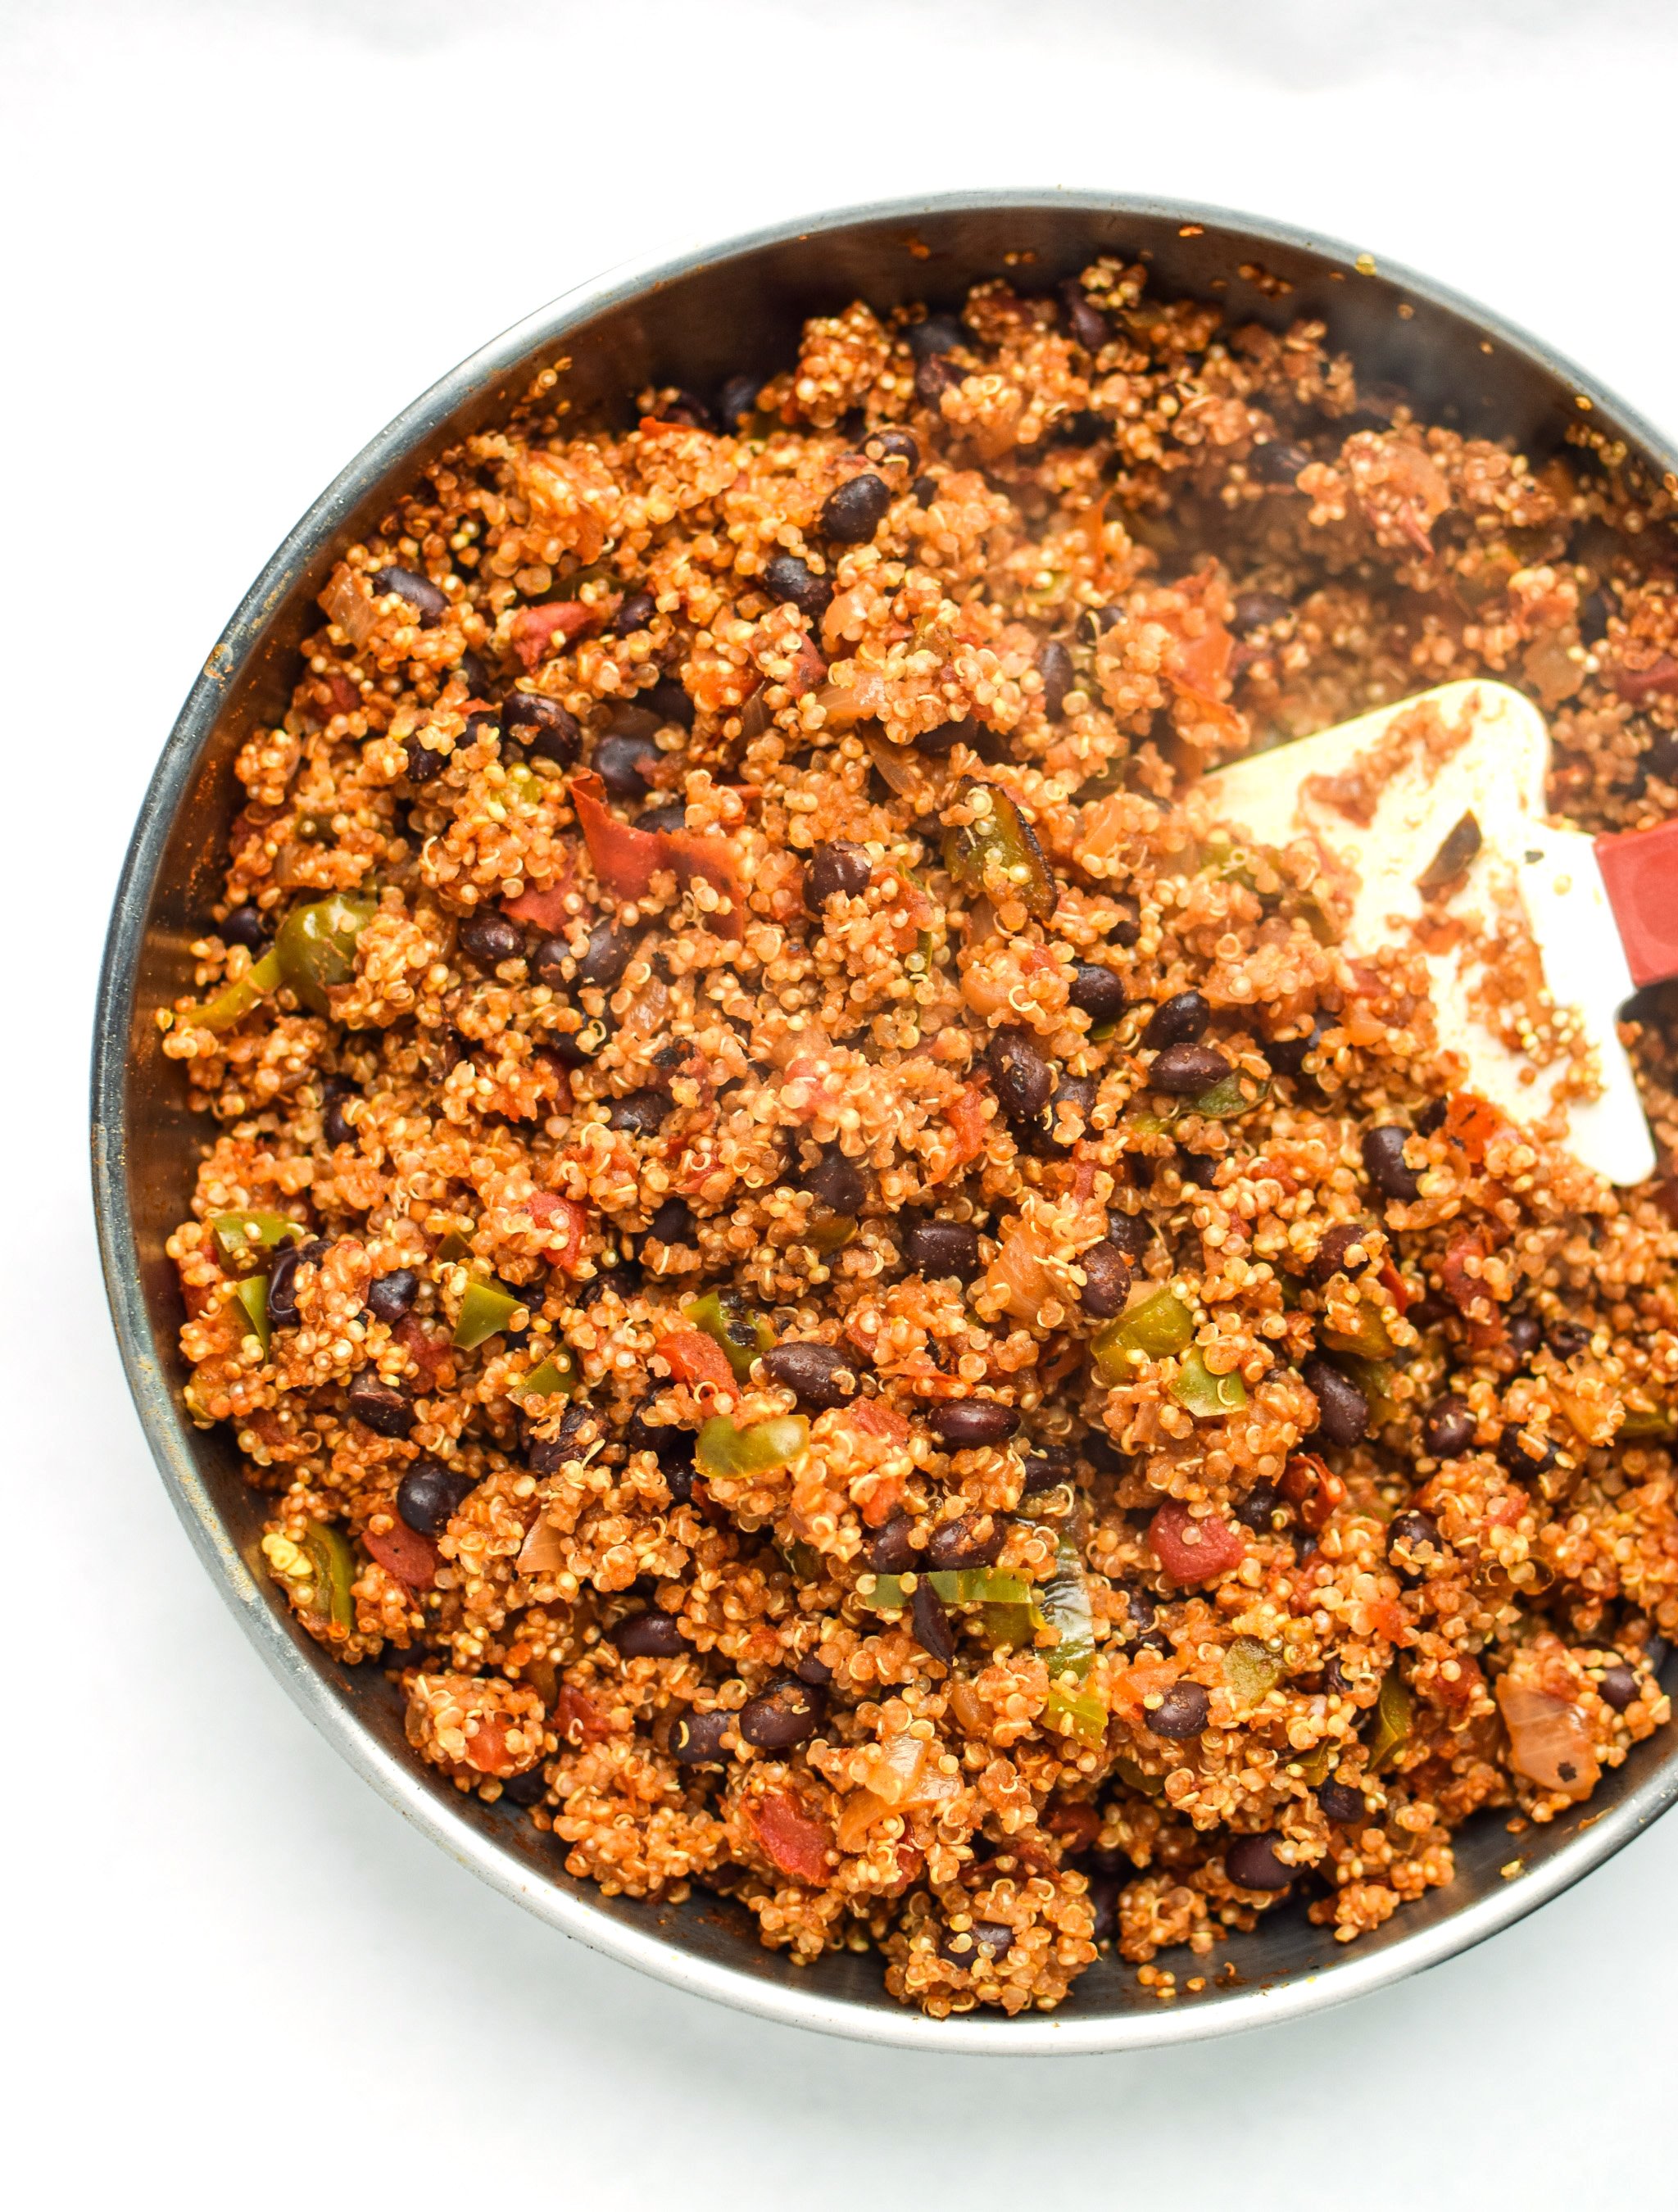 An overhead view of a skillet of cooked mexican quinoa with fire roasted tomatoes, peppers and onions.